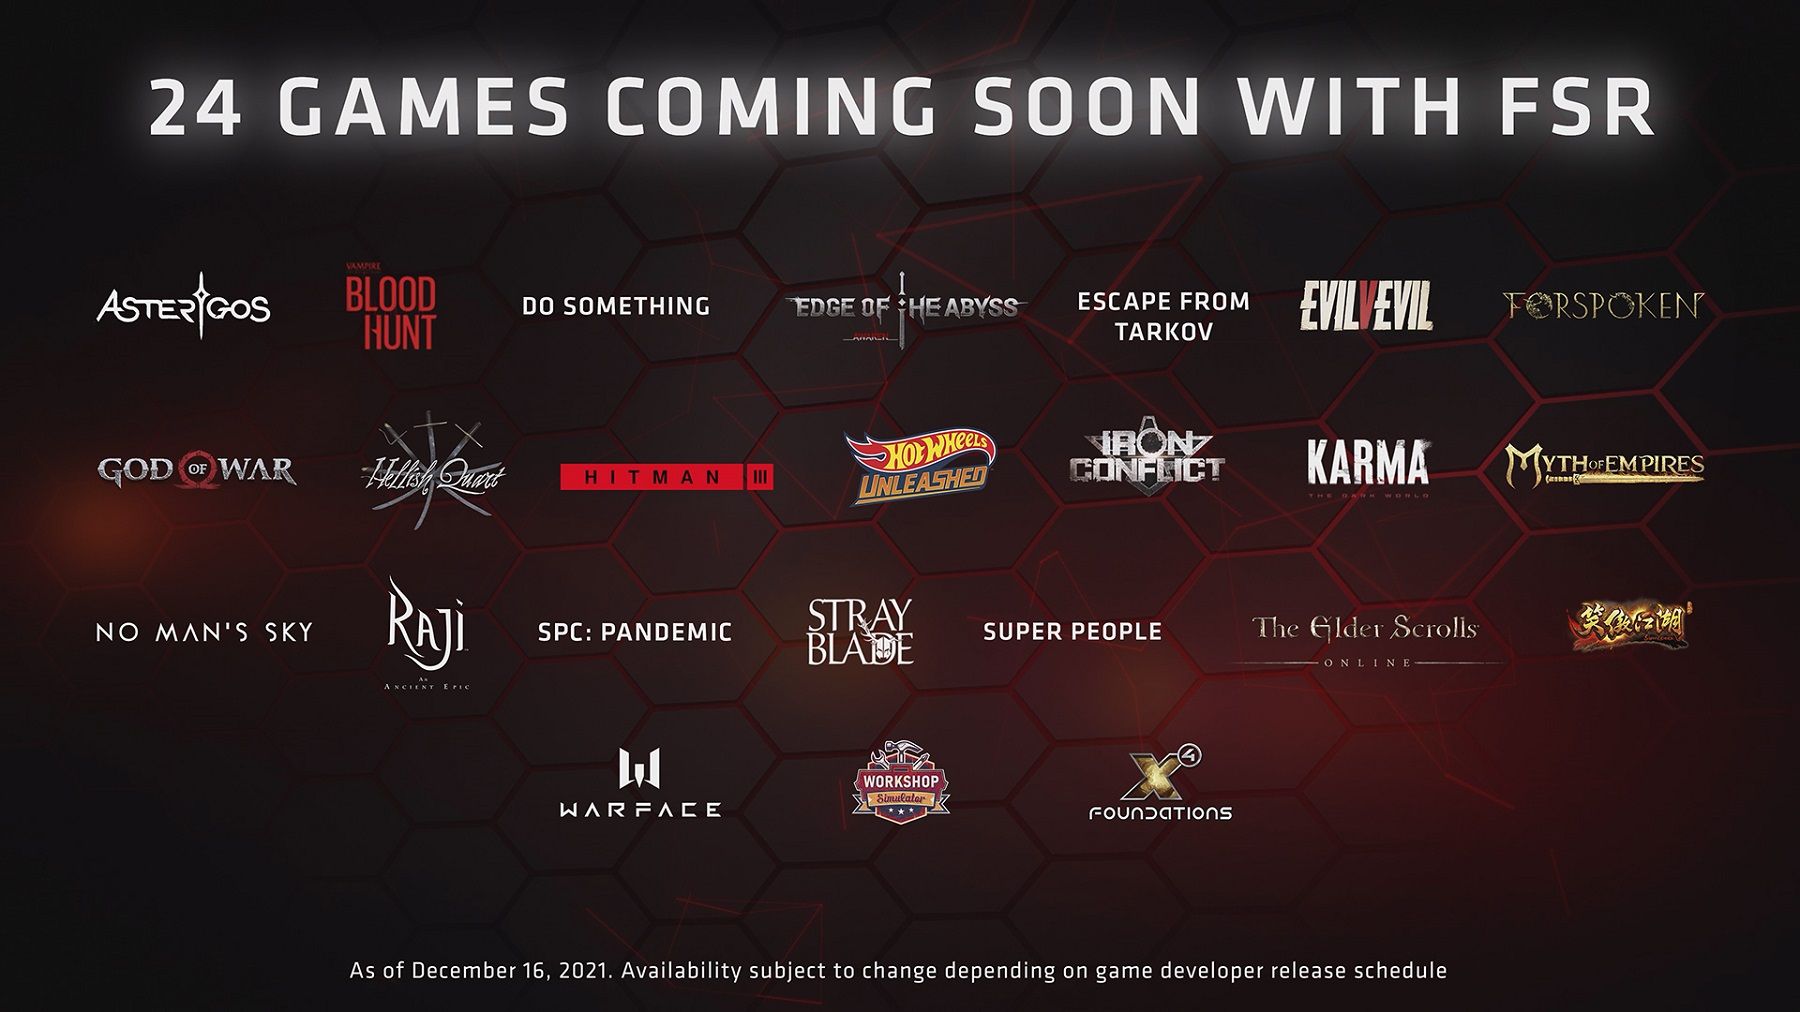 Image showing upcoming games that will have AMD FSR support, including Hitman 3, and God of War.